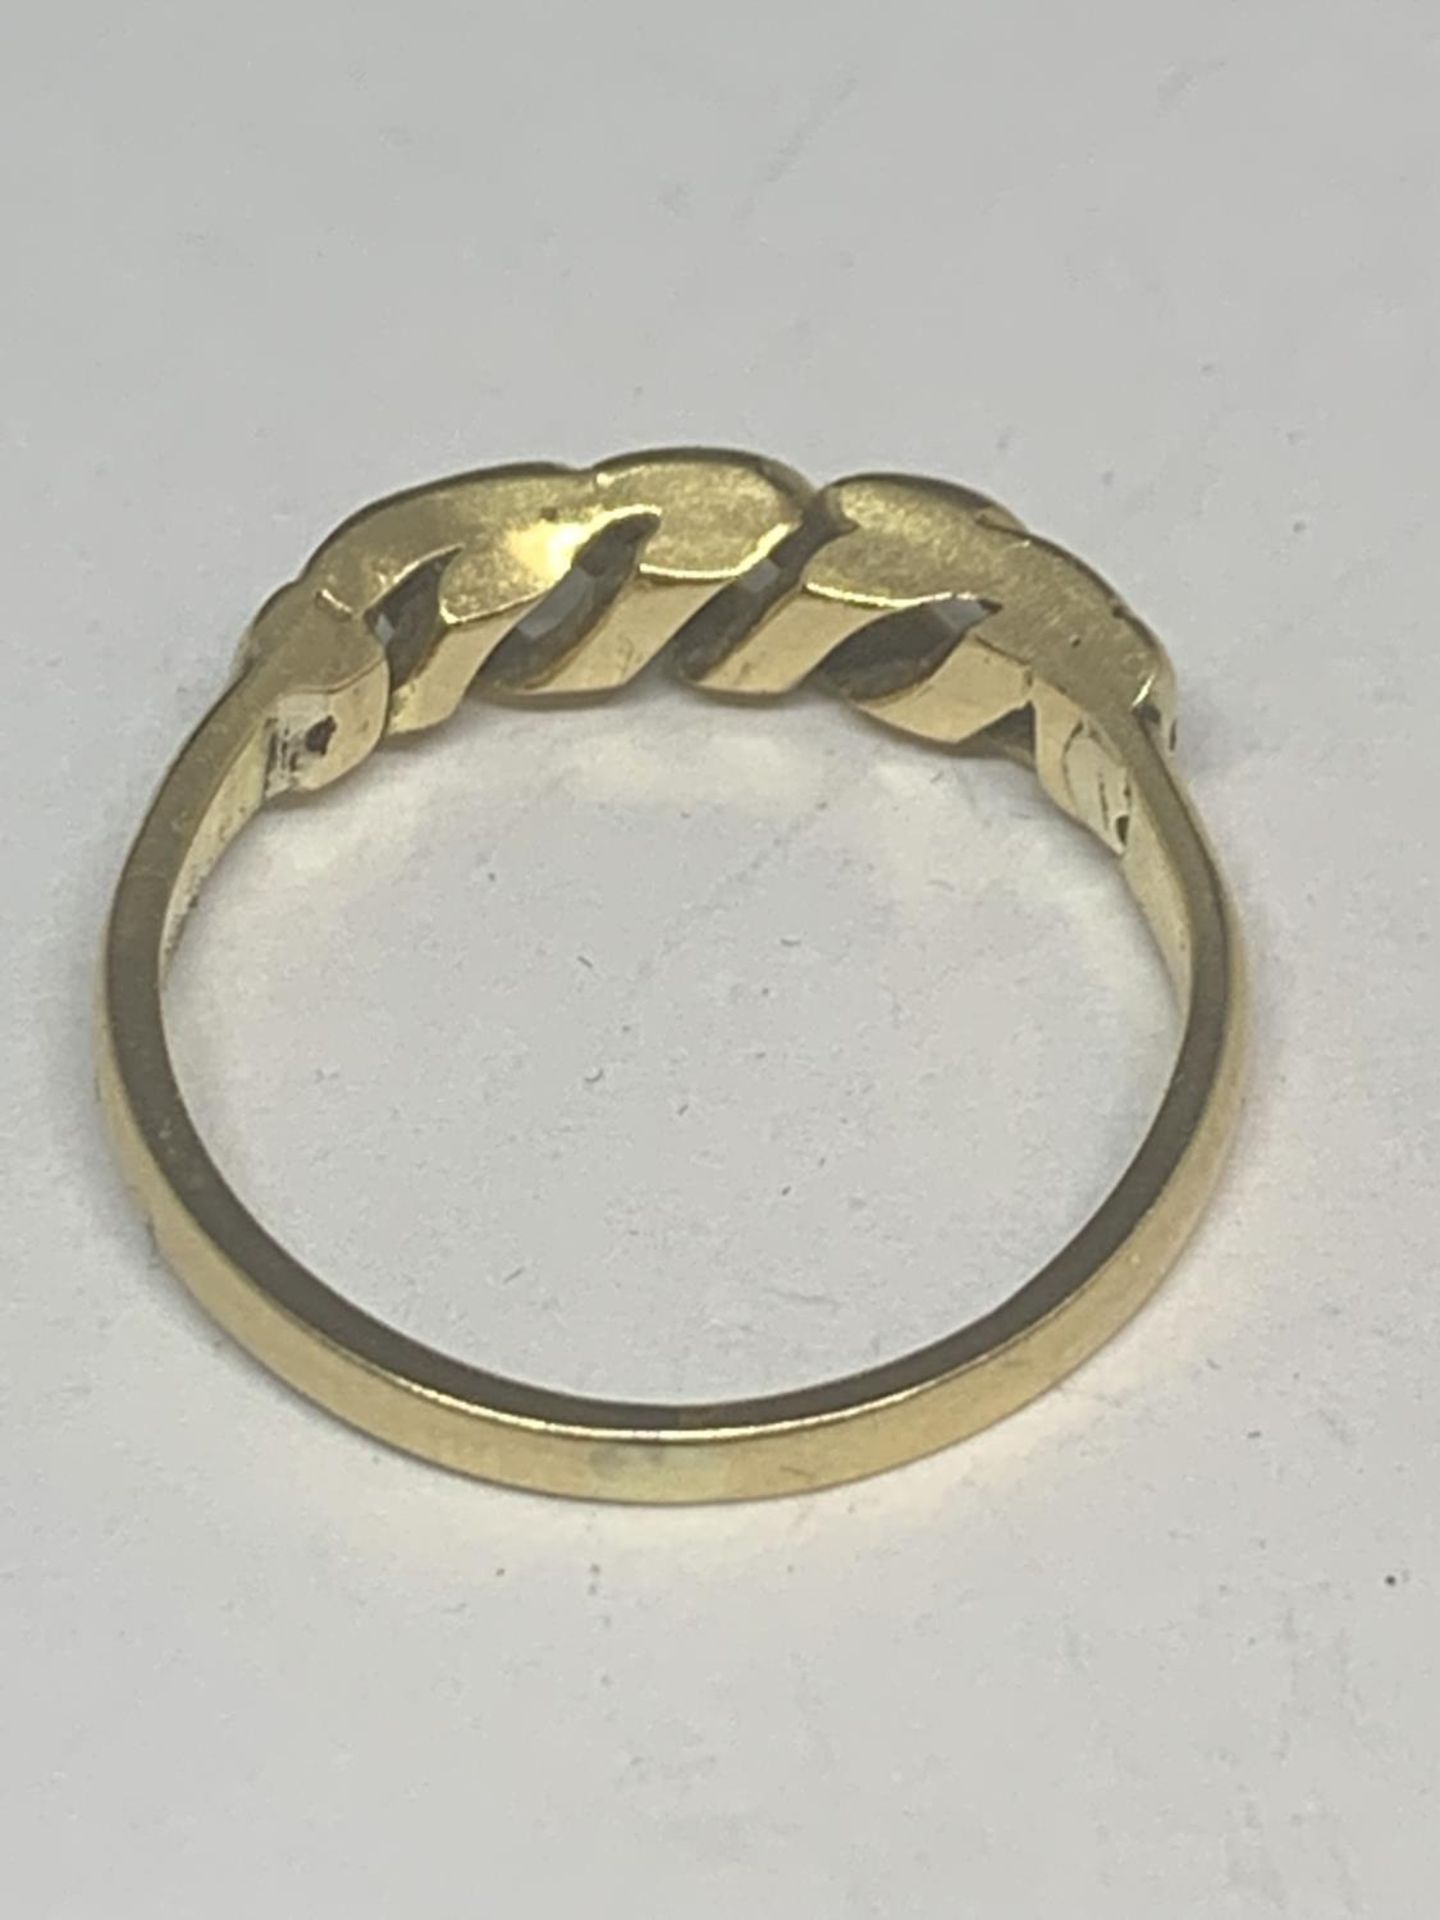 AN 18 CARAT GOLD RING WITH TWIST DESIGN GROSS WEIGHT 3.16 GRAMS SIZE N - Image 5 of 8